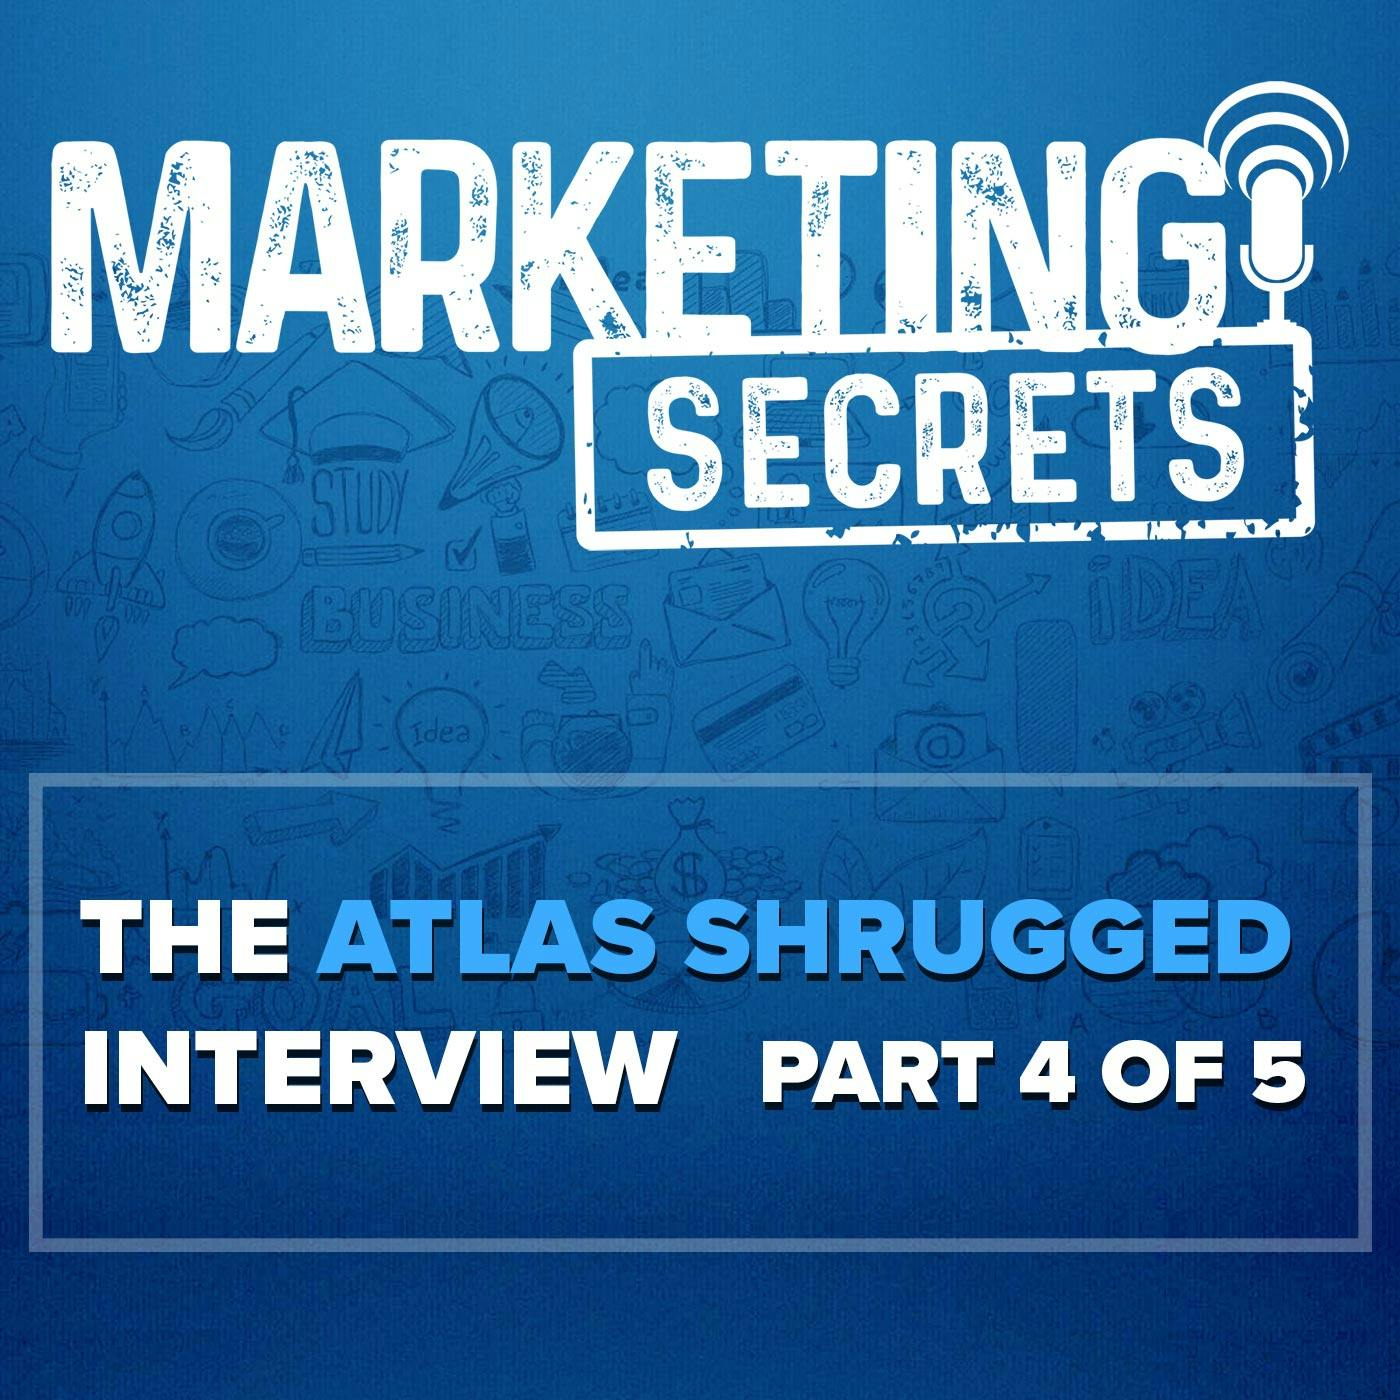 The Atlas Shrugged Interview - Part 4 of 5